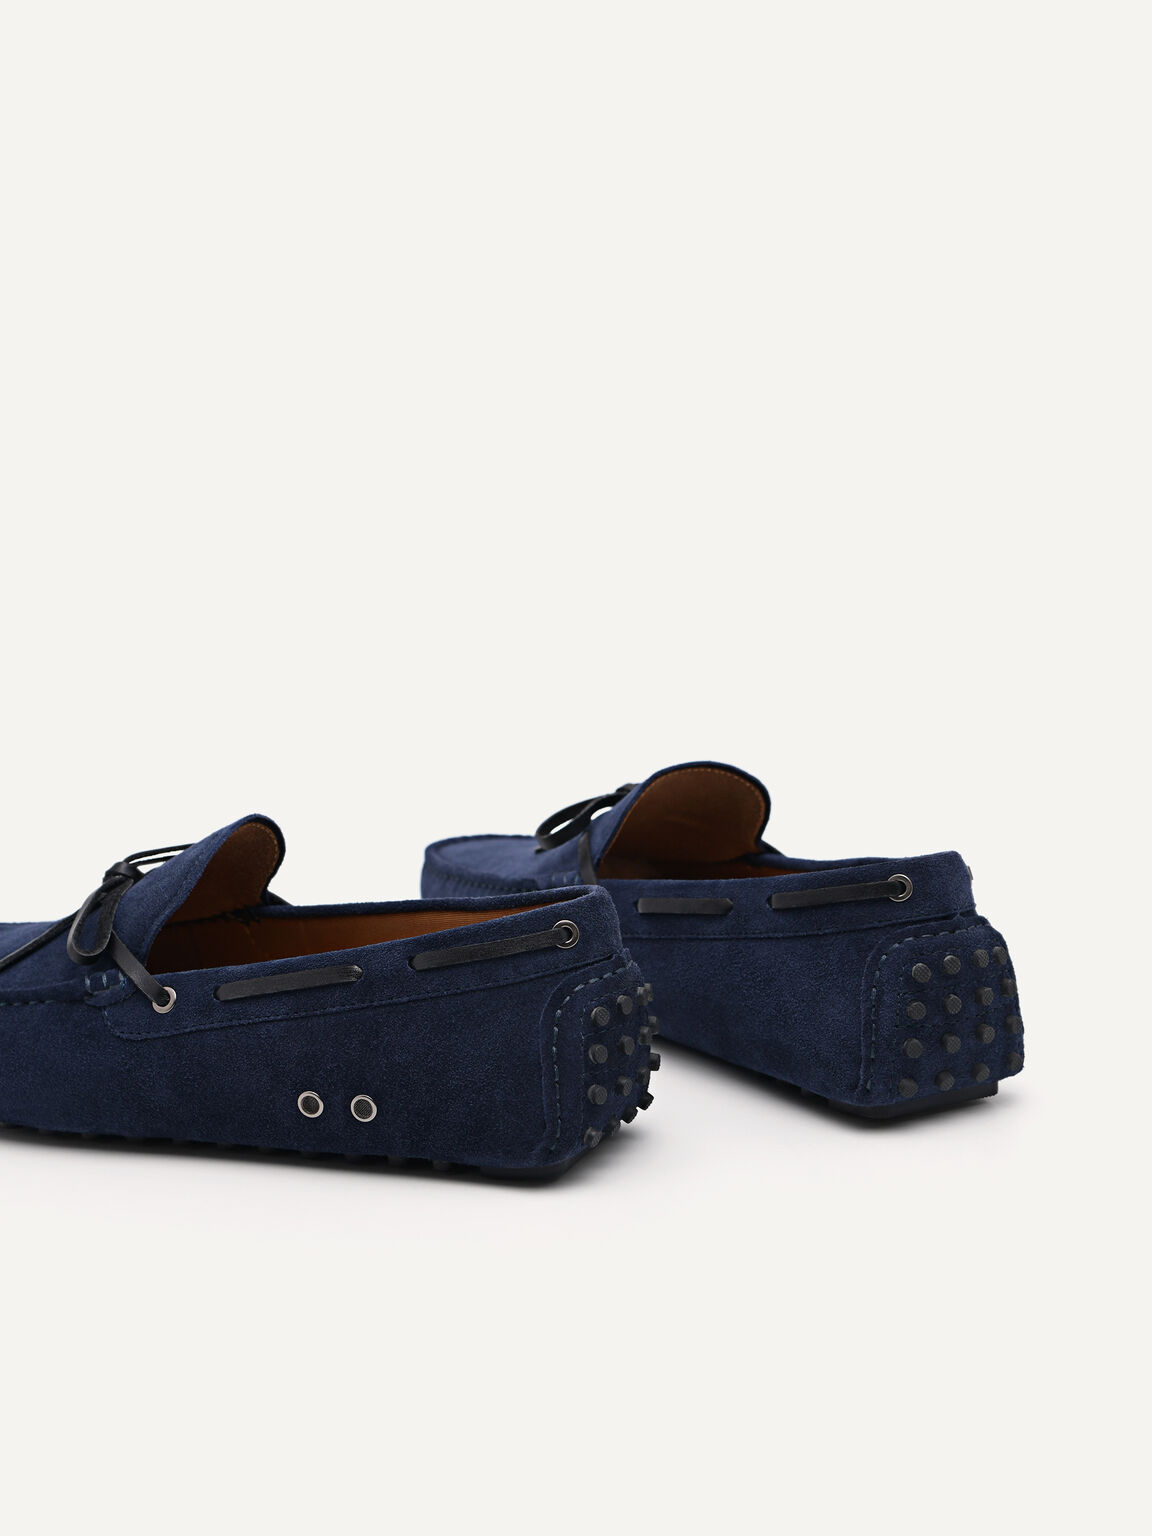 Suede Moccasins with Bow Detail, Navy